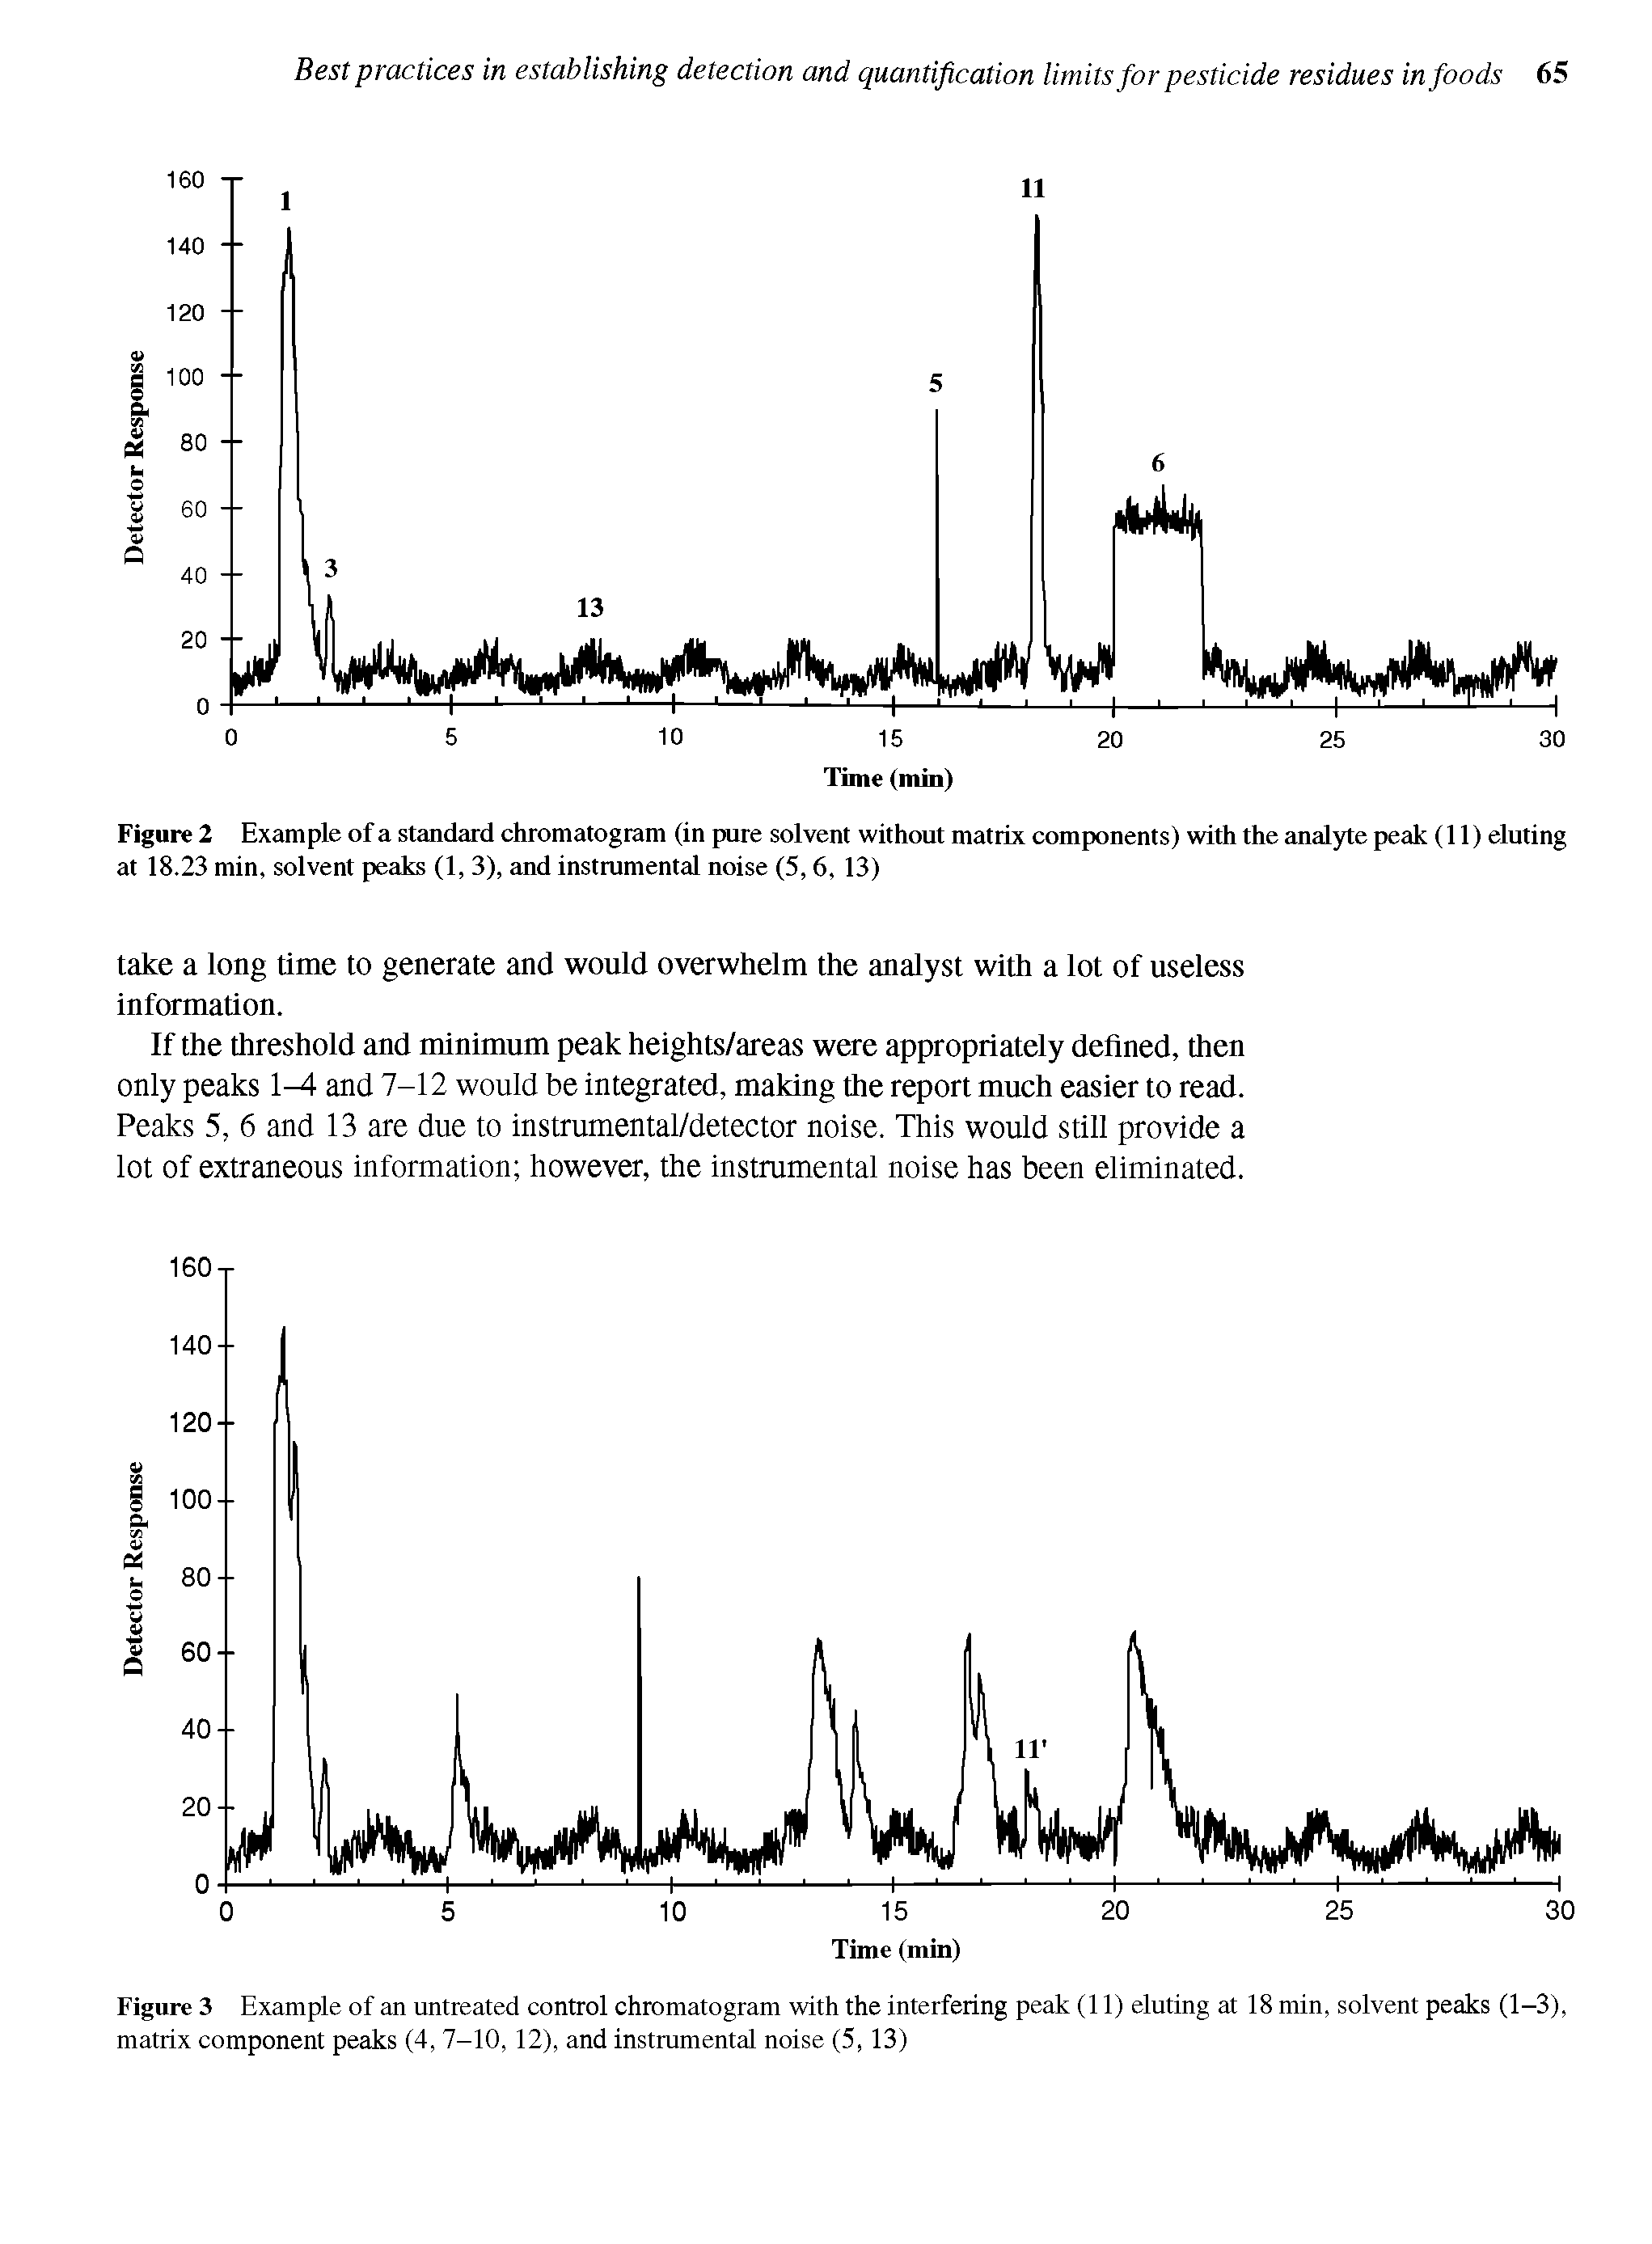 Figure 2 Example of a standard chromatogram (in pure solvent without matrix components) with the analyte peak (11) eluting at 18.23 min, solvent peaks (1, 3), and instrumental noise (5,6, 13)...